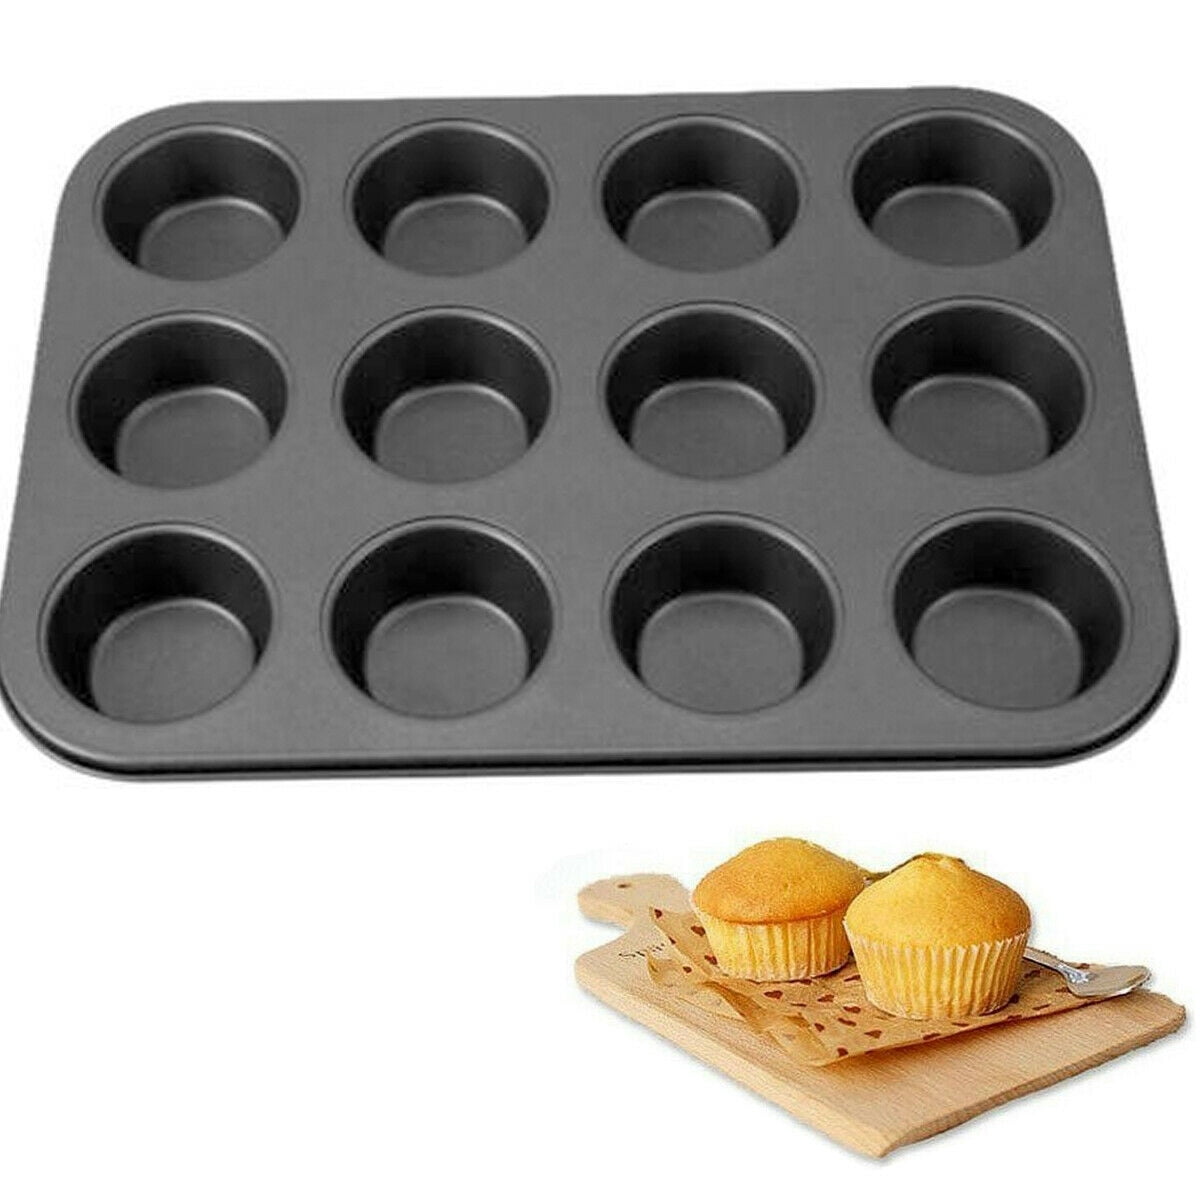 Details about   Felji 24-Cup Non-Stick Mini Muffin and Cupcake Pan 